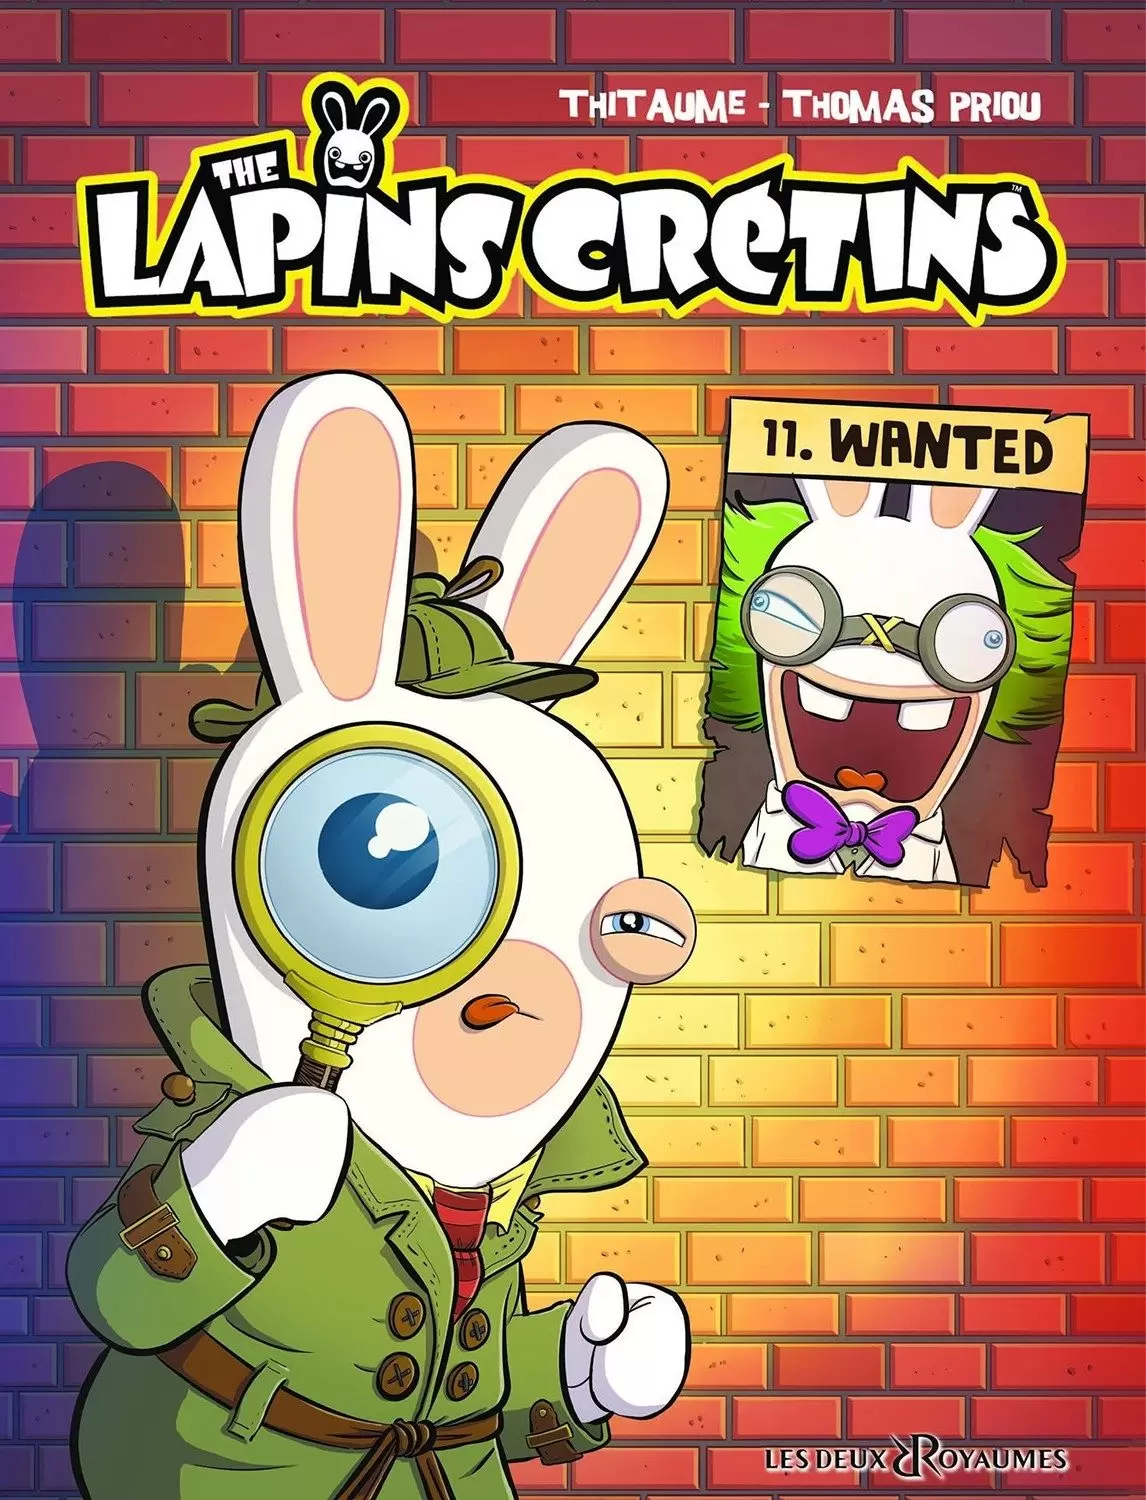 The Lapins Crétins - Wanted